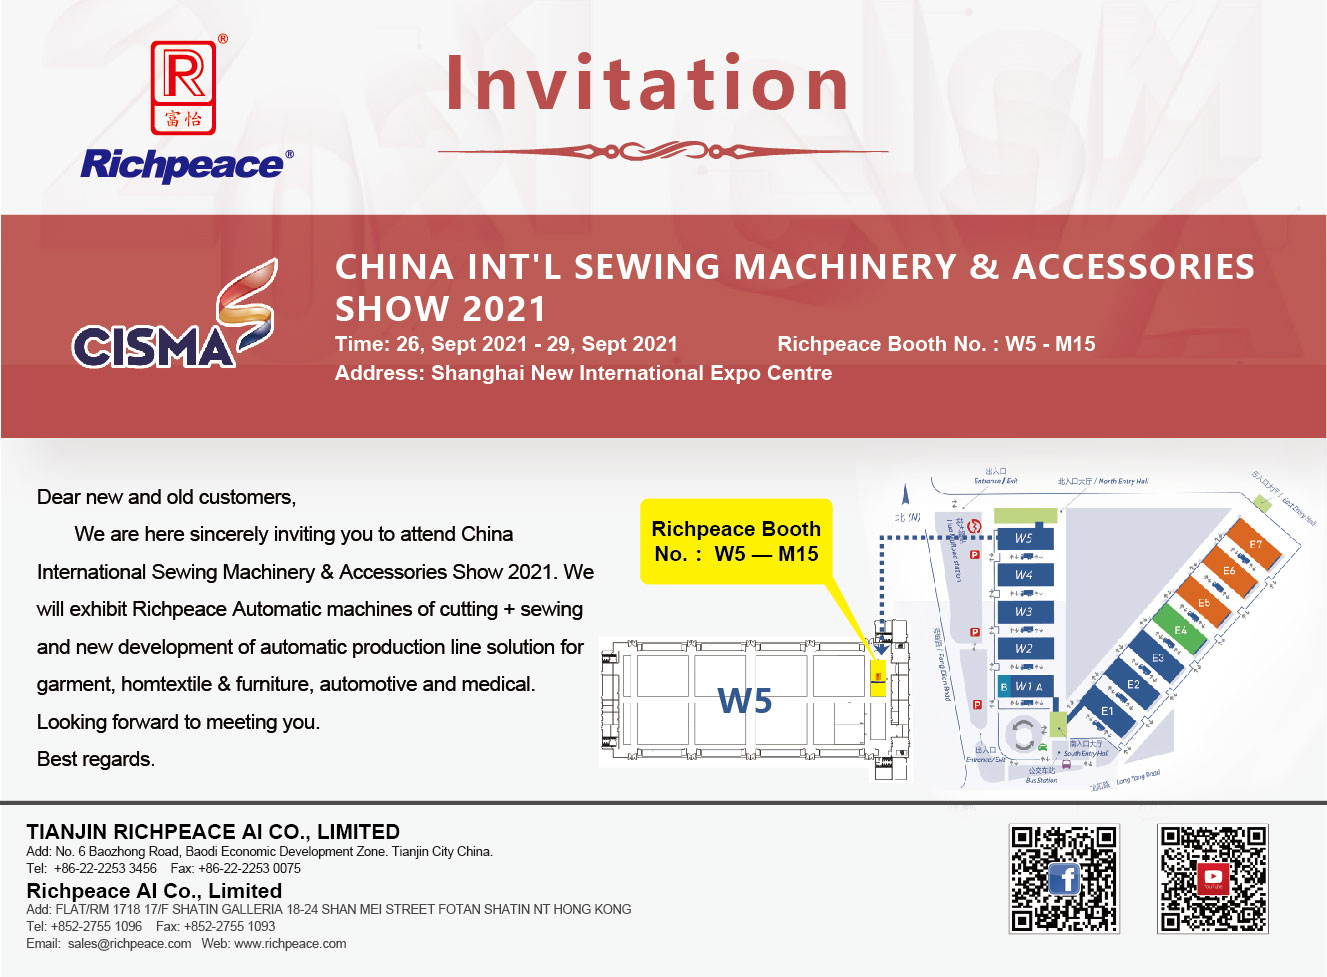 CHINA INT'L SEWING MACHINERY & ACCESSORIES SHOW 2021